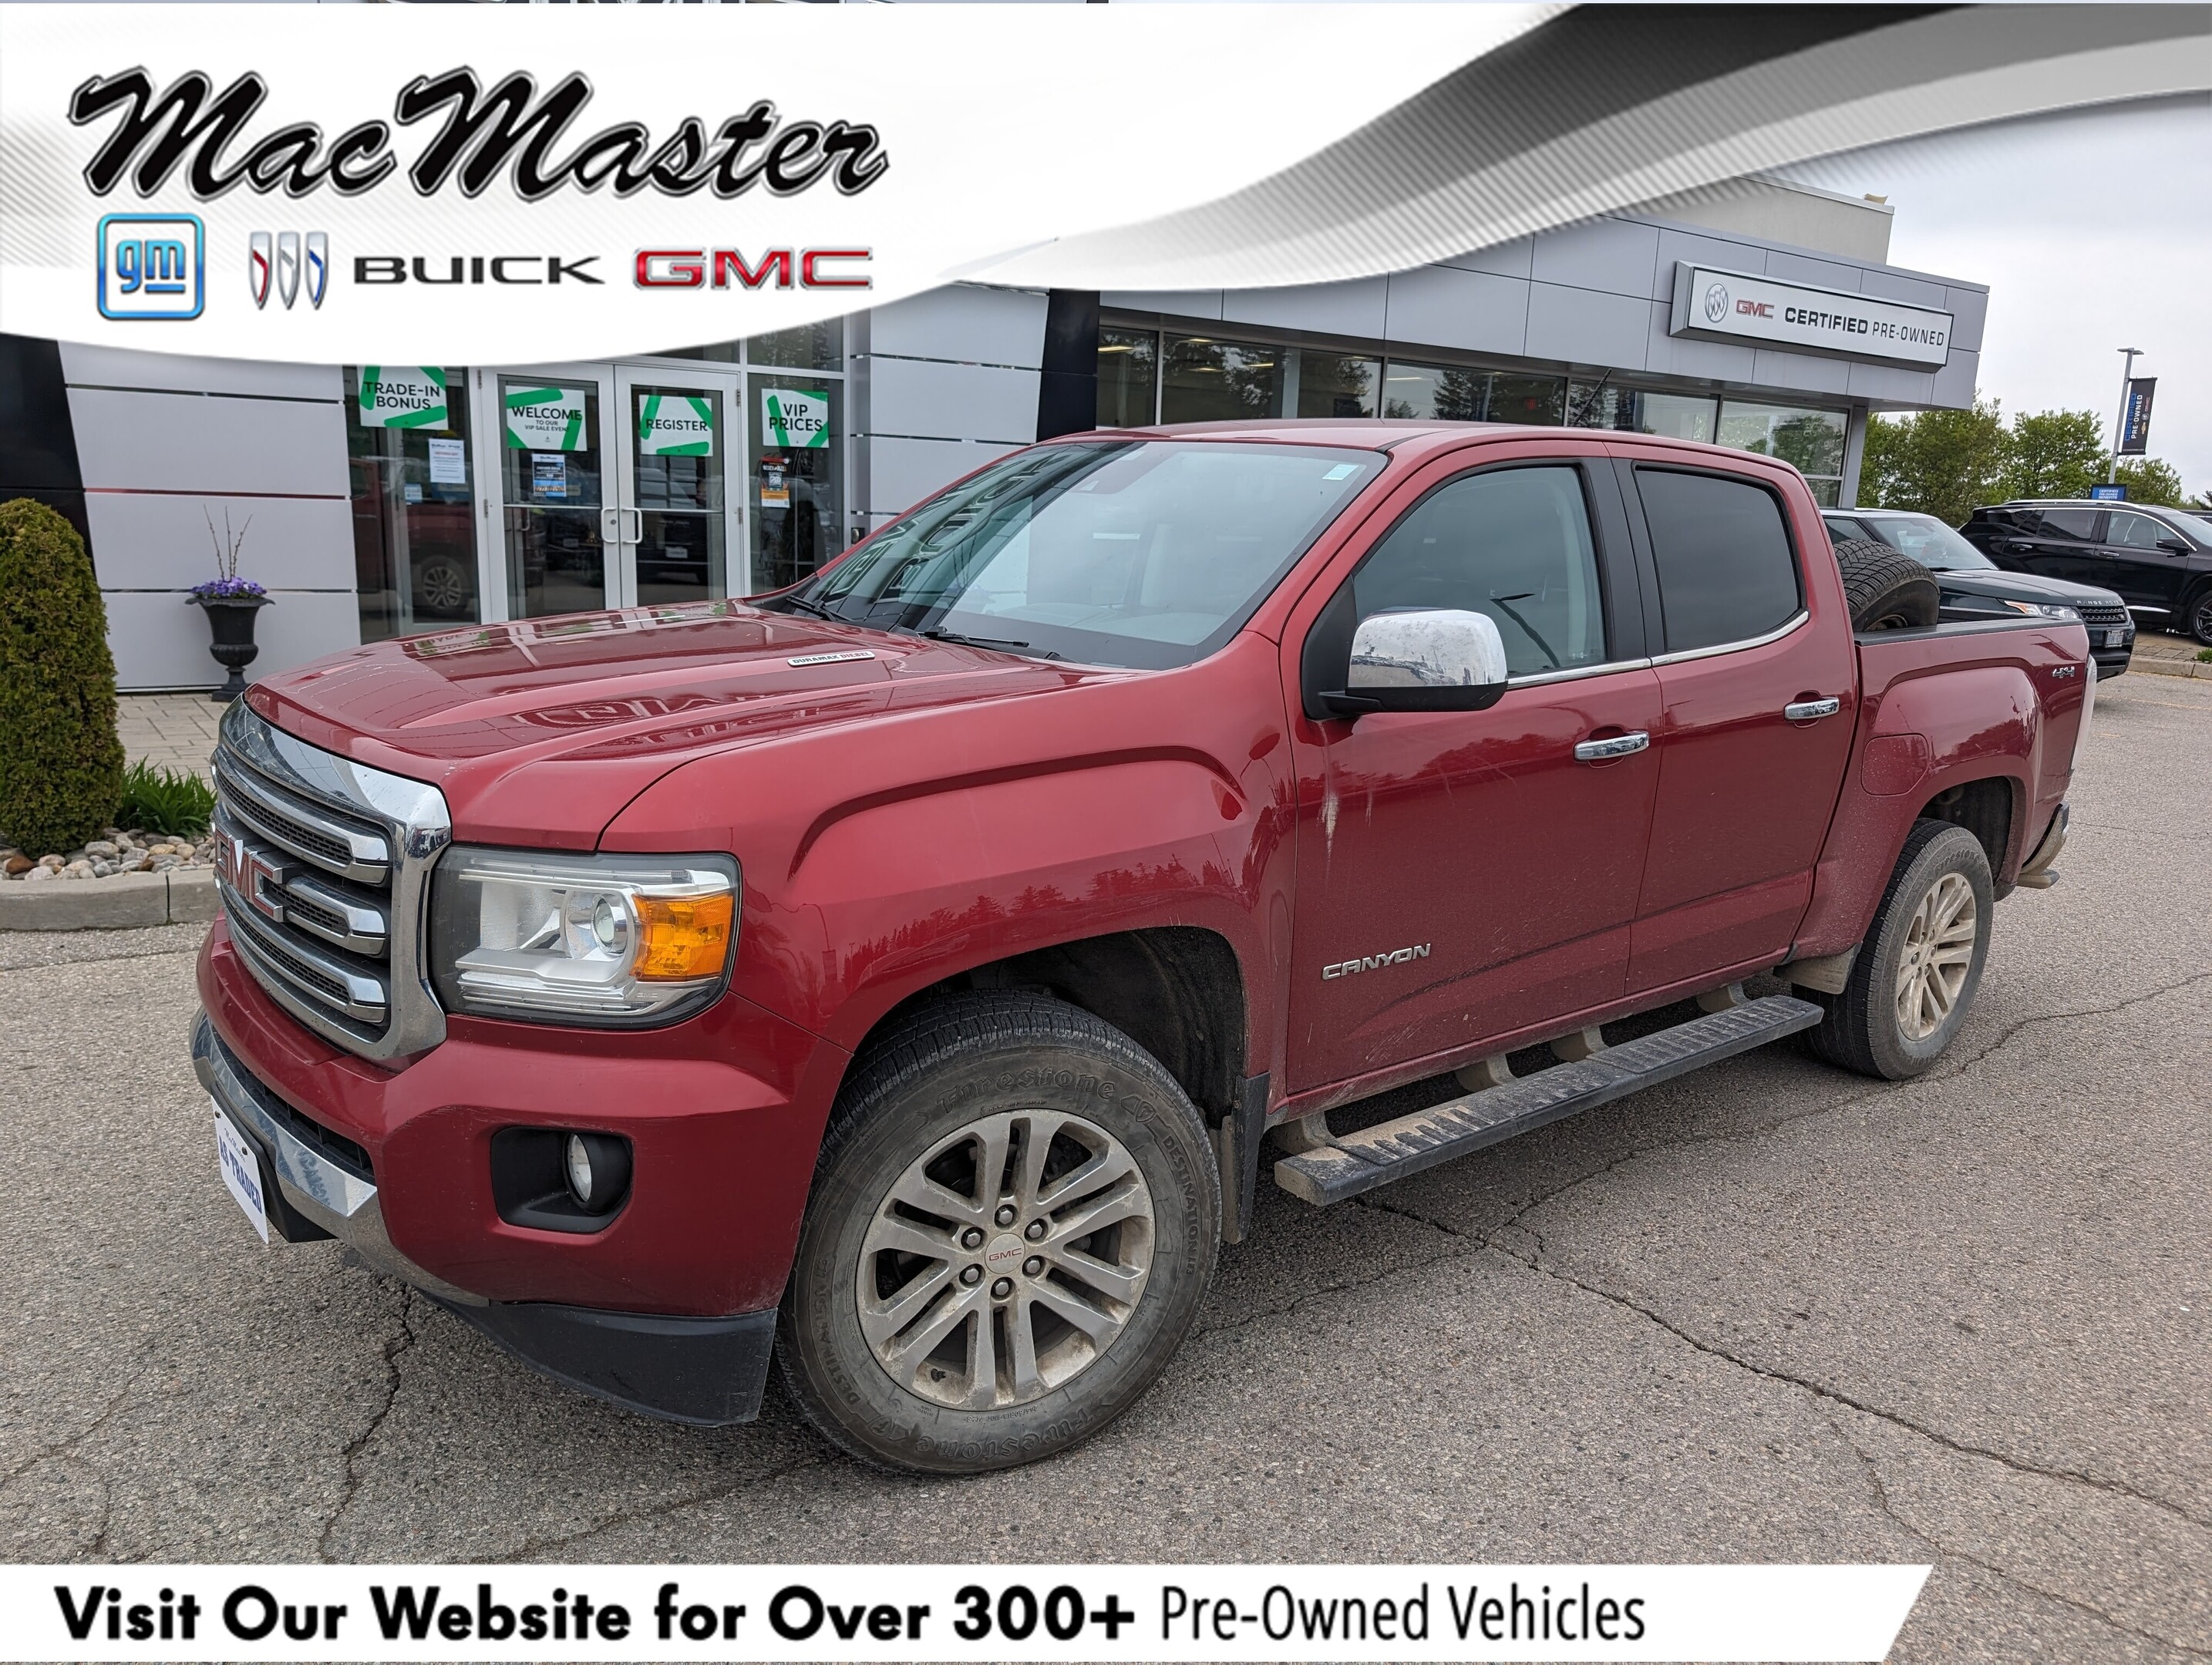 2016 GMC Canyon SLT, CREW, 4X4, DURAMAX, NAV, HTD LEATHER, AS-IS!